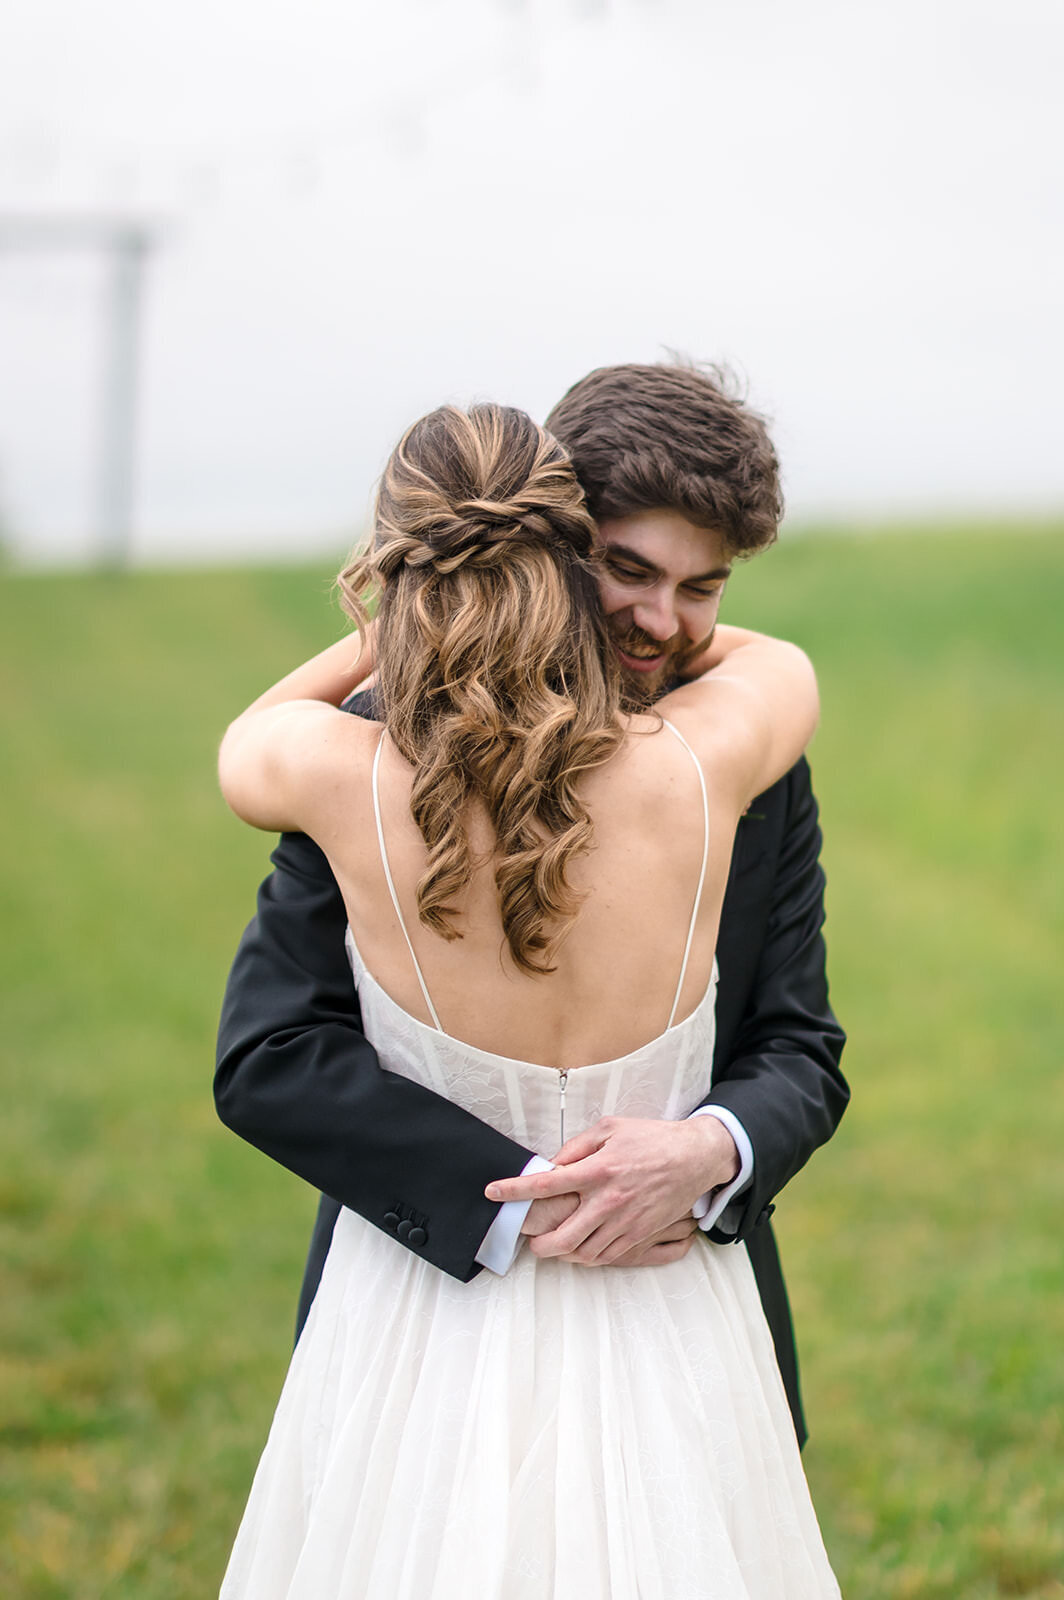 A bride and groom in a close embrace, with the bride's back turned to the camera, showcasing her updo hairstyle and the back of her dress.